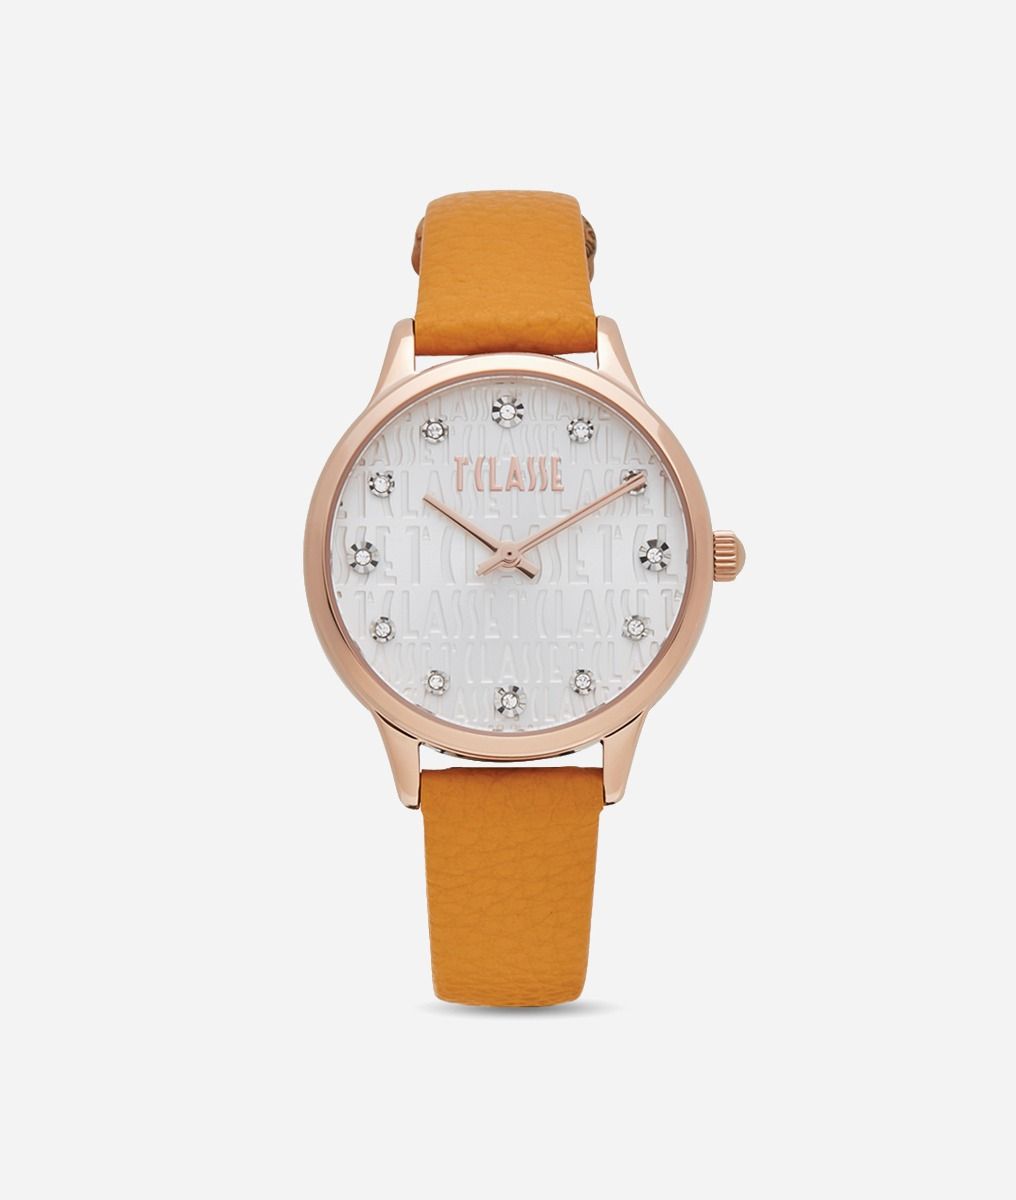 Formentera watch with hammered leather strap Saffron,front